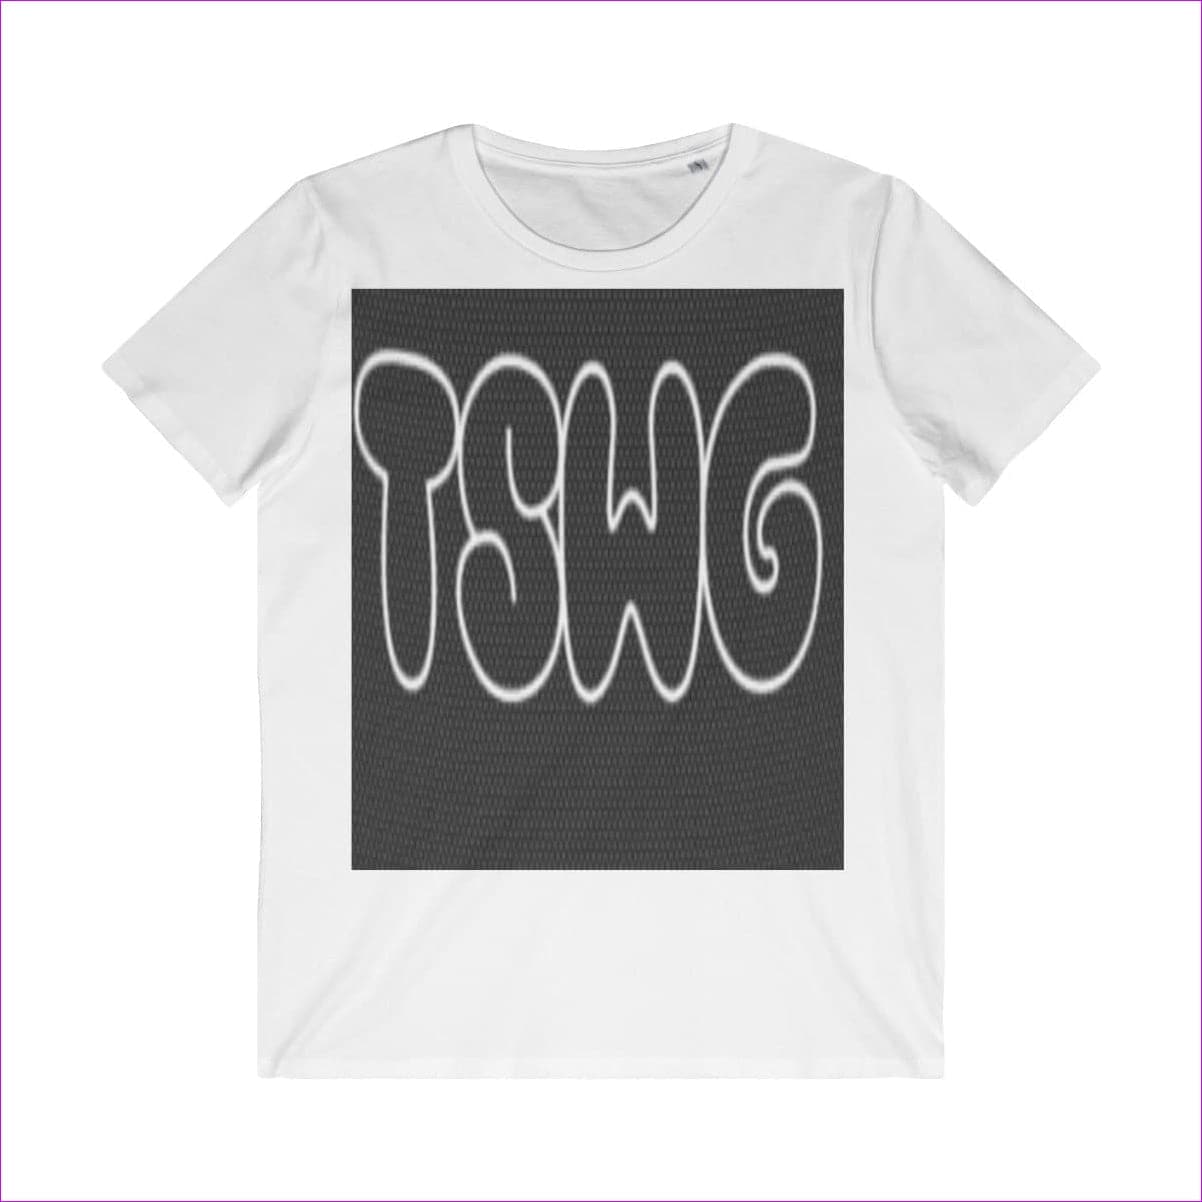 White TSWG ( Tough Smooth Well Groomed) Men's Organic Tee - T-Shirt at TFC&H Co.